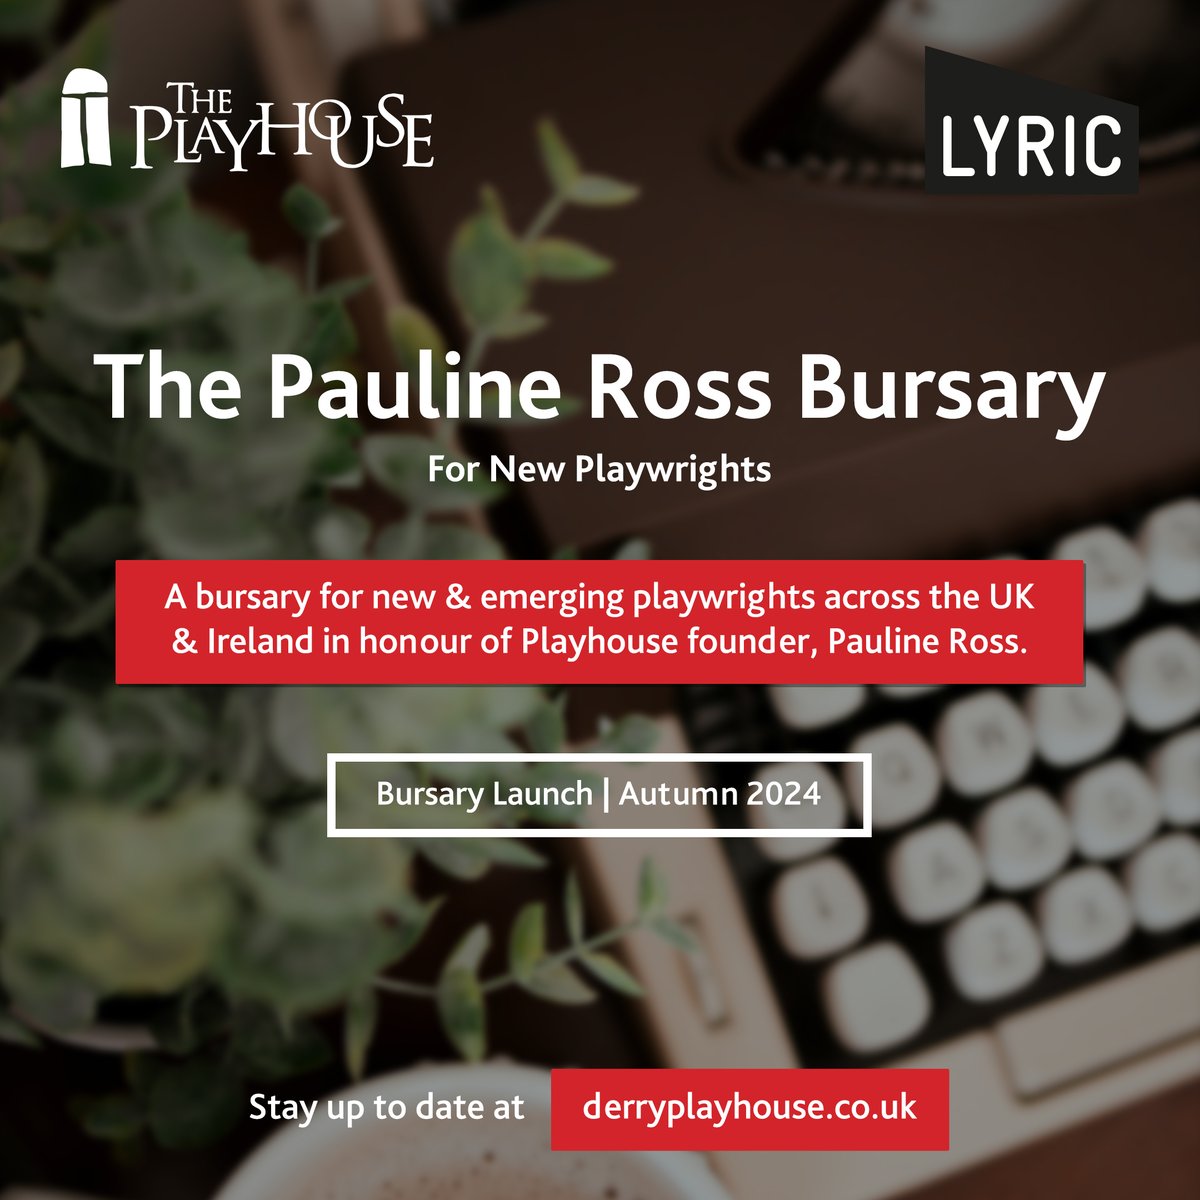 To celebrate International Women's Day 2024, The Playhouse in association with @LyricBelfast are delighted to announce the launch of a bursary for new & emerging playwrights across the UK & Ireland in honour of Playhouse founder, Pauline Ross. 📷 Pauline is a cultural leader who…